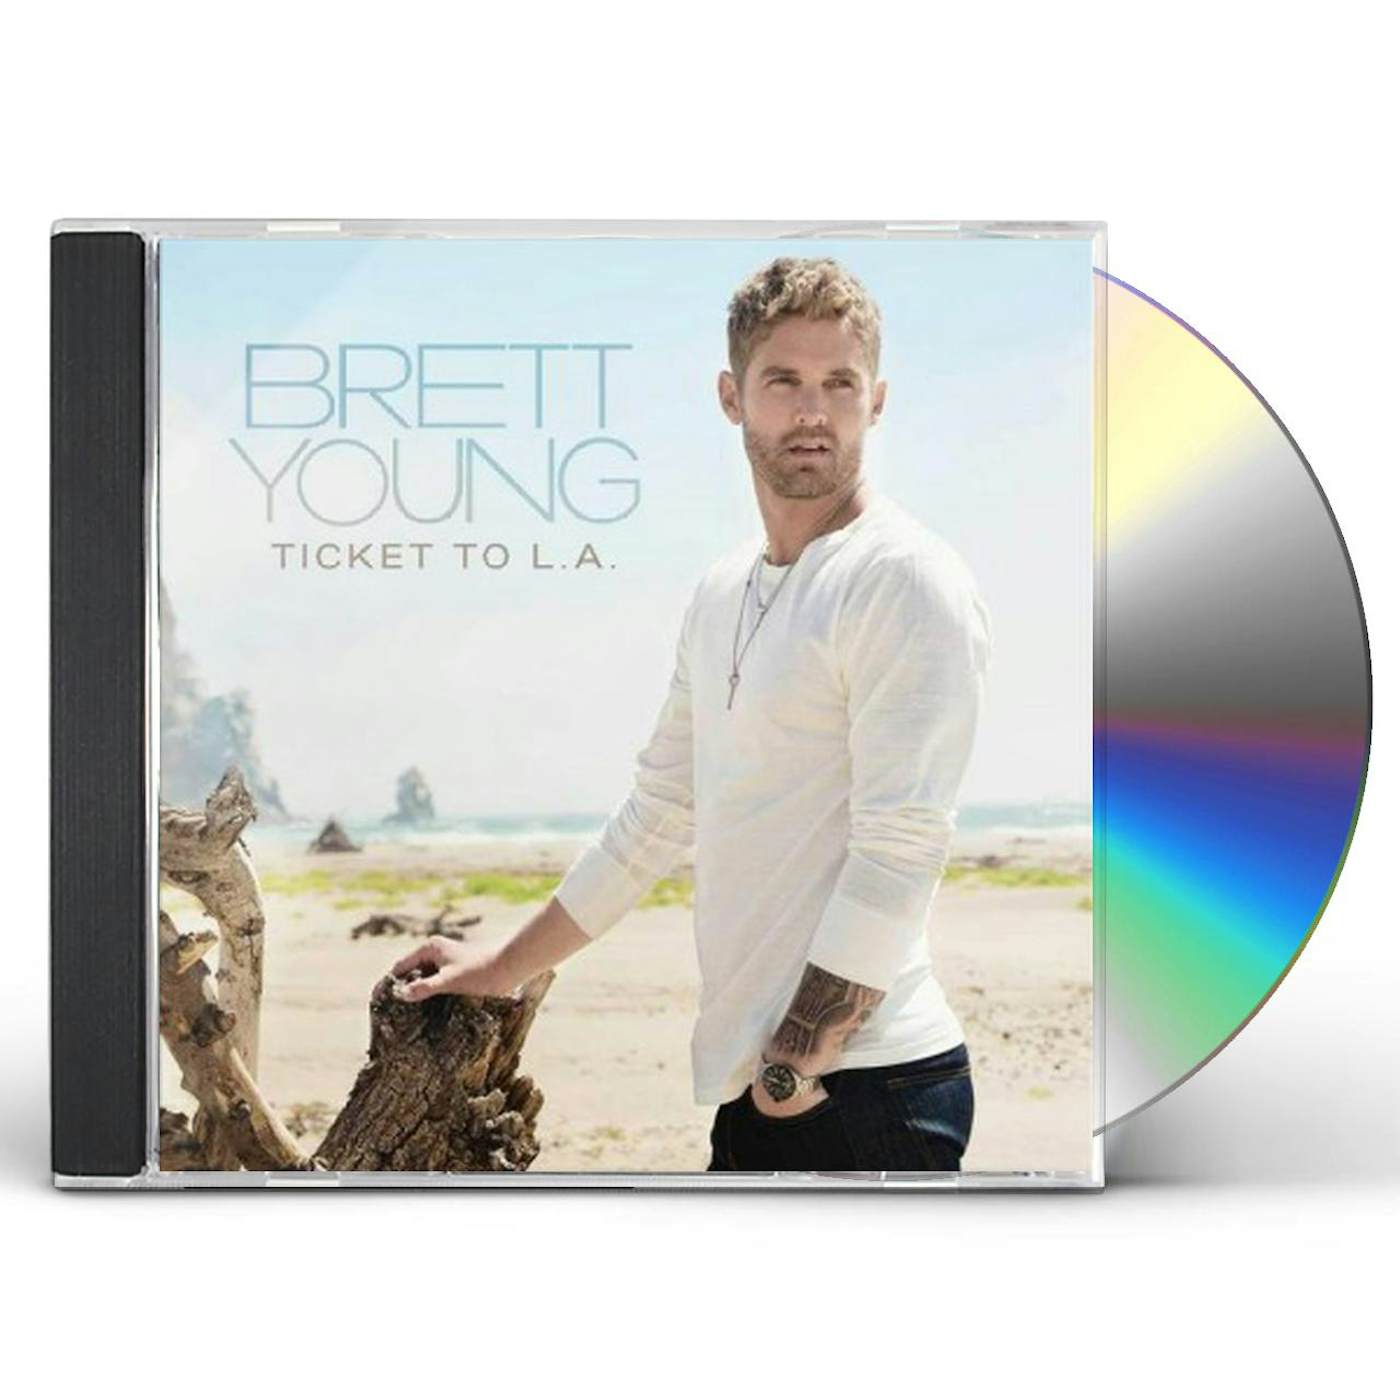 Brett Young TICKET TO L.A. CD